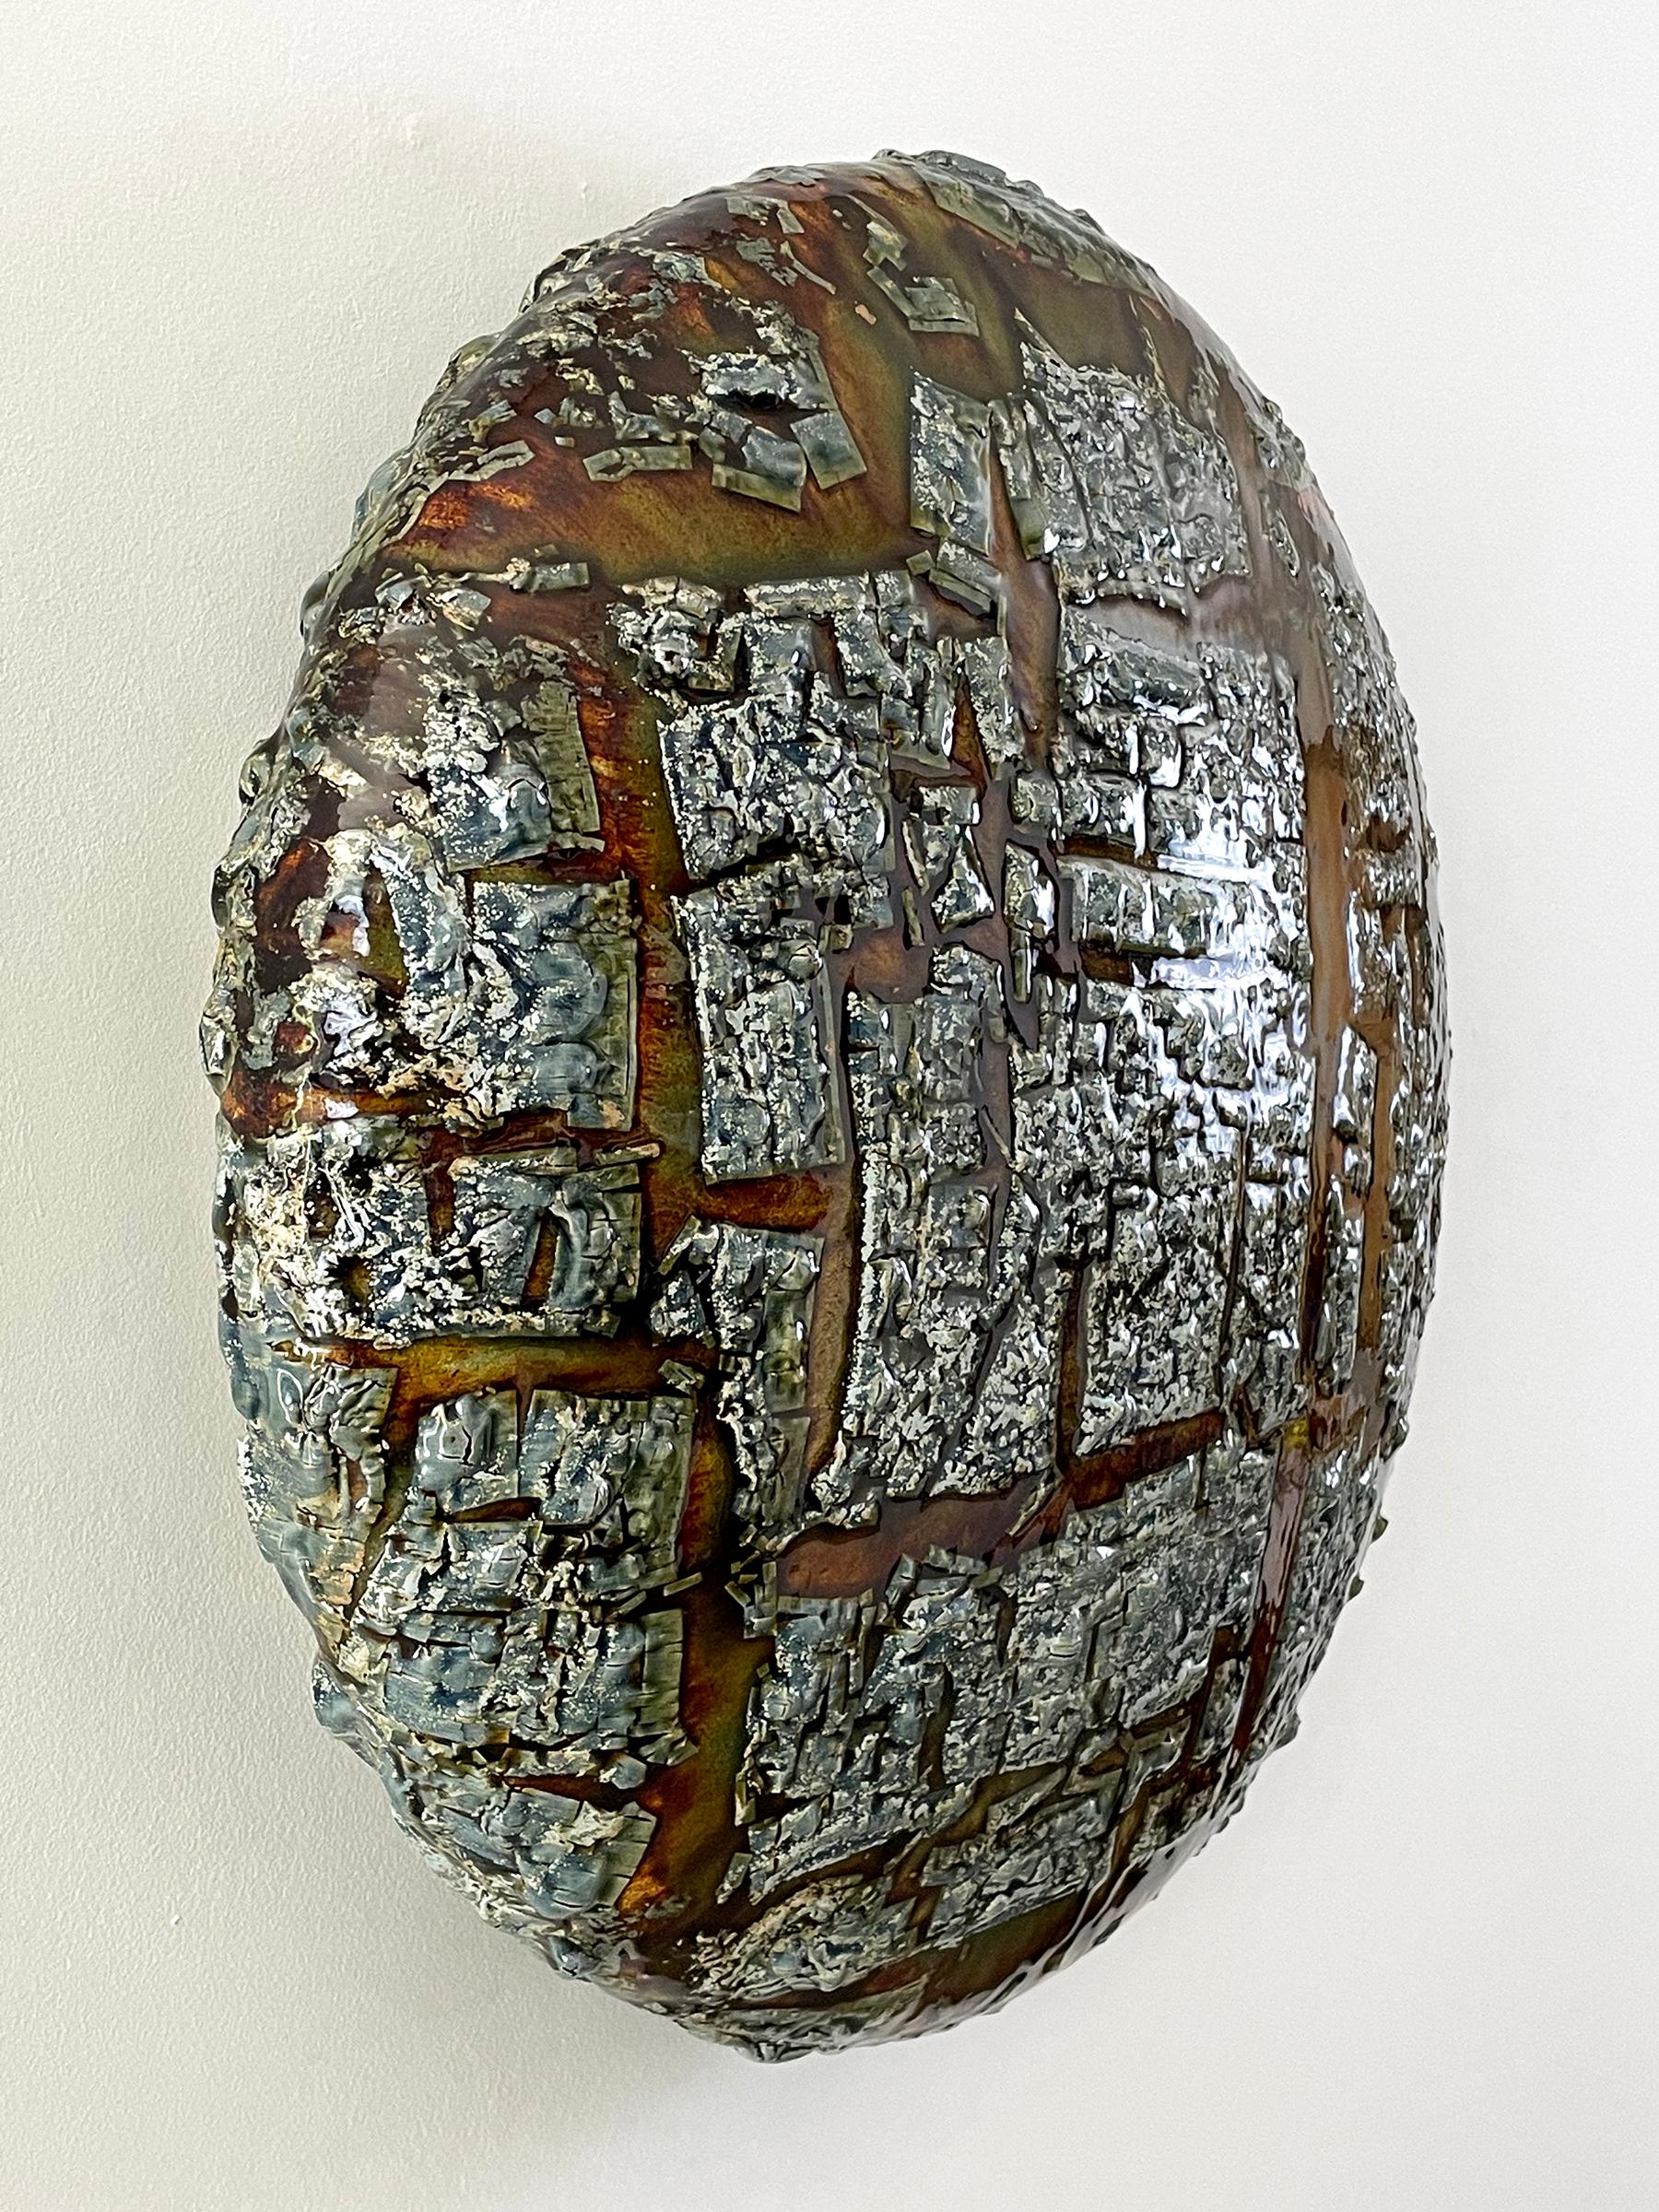 Adrift - Ceramic Wall Sculpture by William Edwards In New Condition For Sale In Moreno Valley, CA